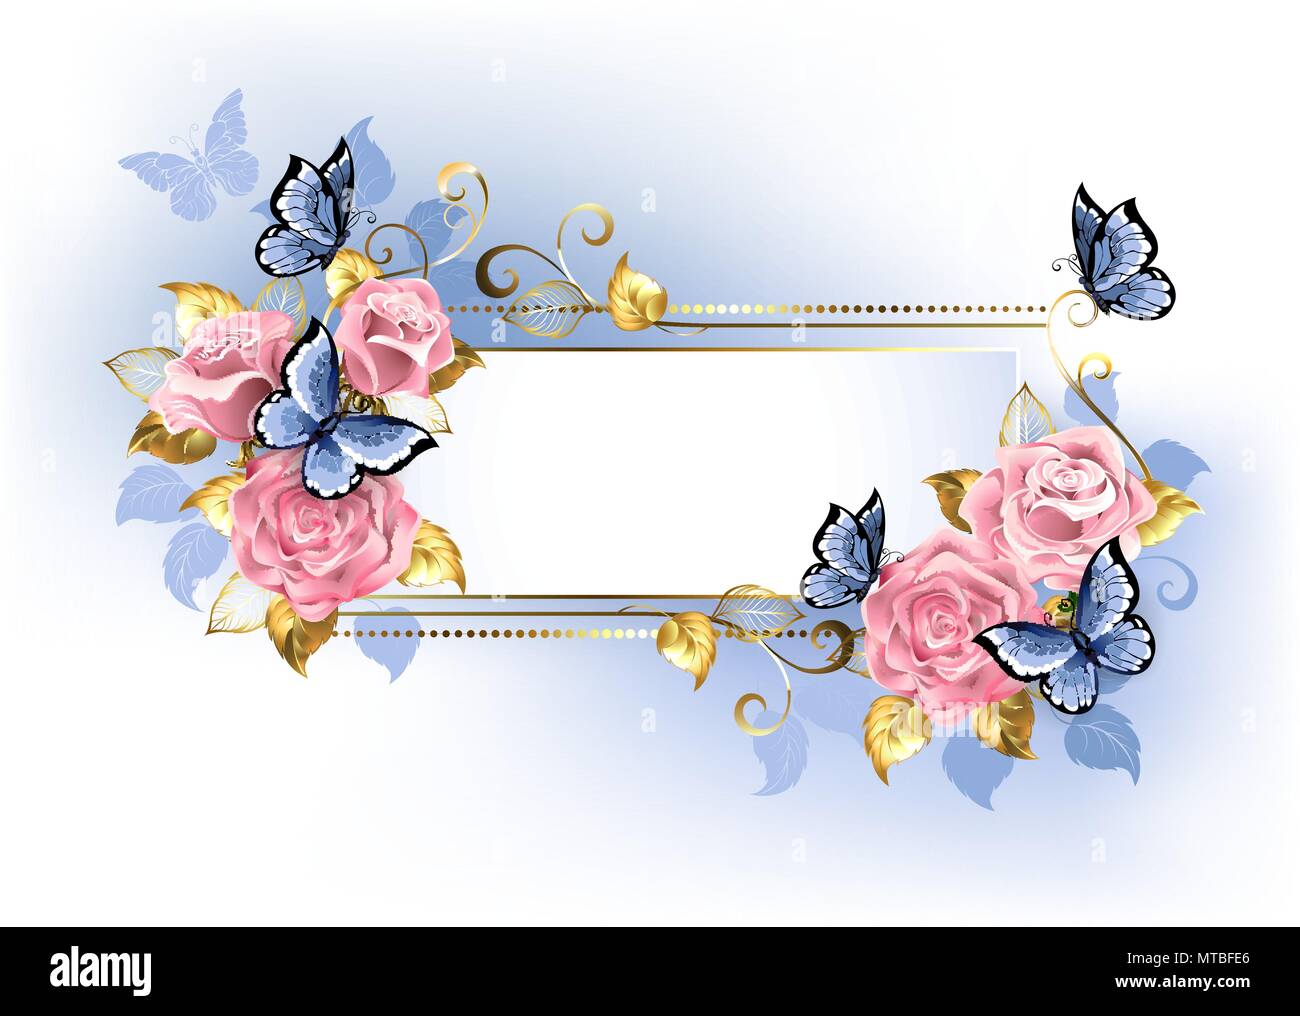 Narrow banner with pink roses, blue and gold leaves with blue butterflies on white background. Stock Vector